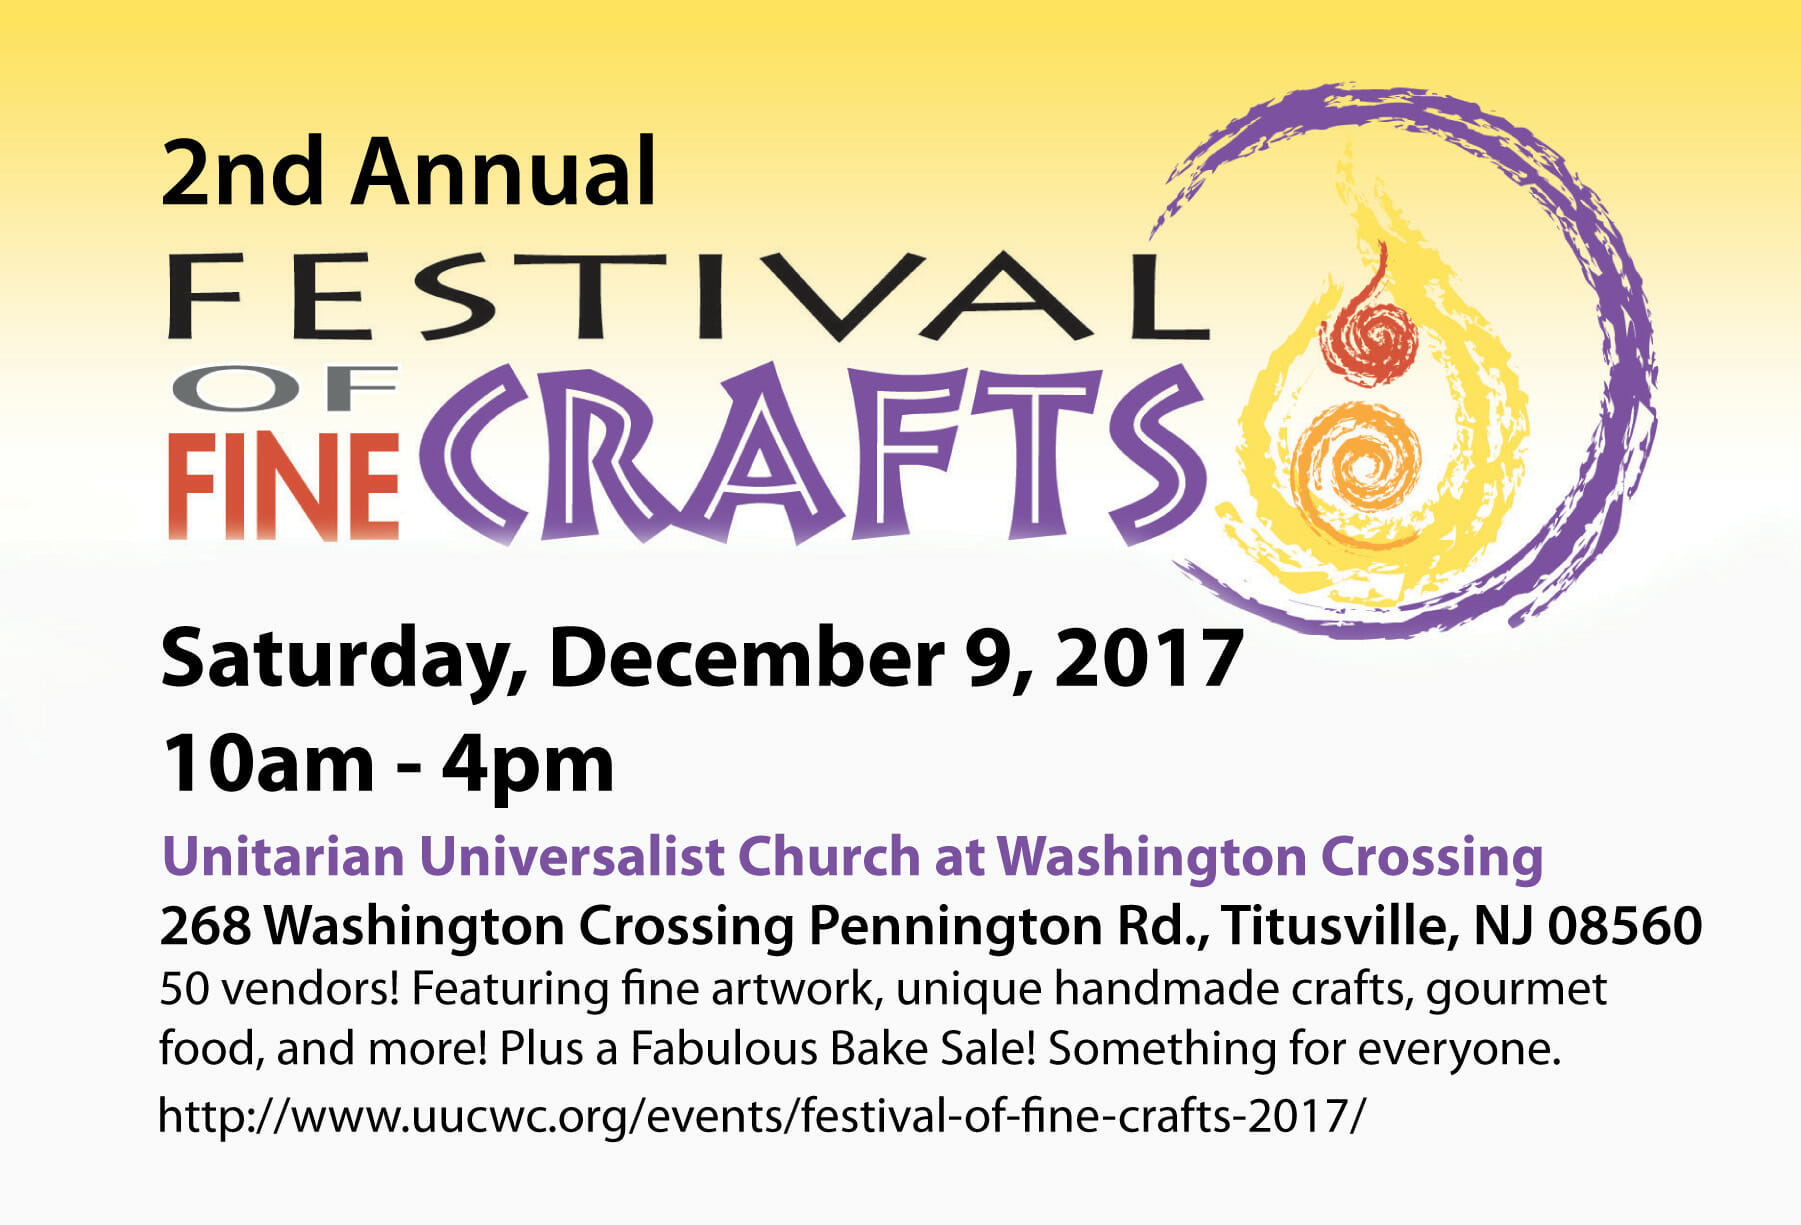 2nd Annual Festival of Fine Crafts